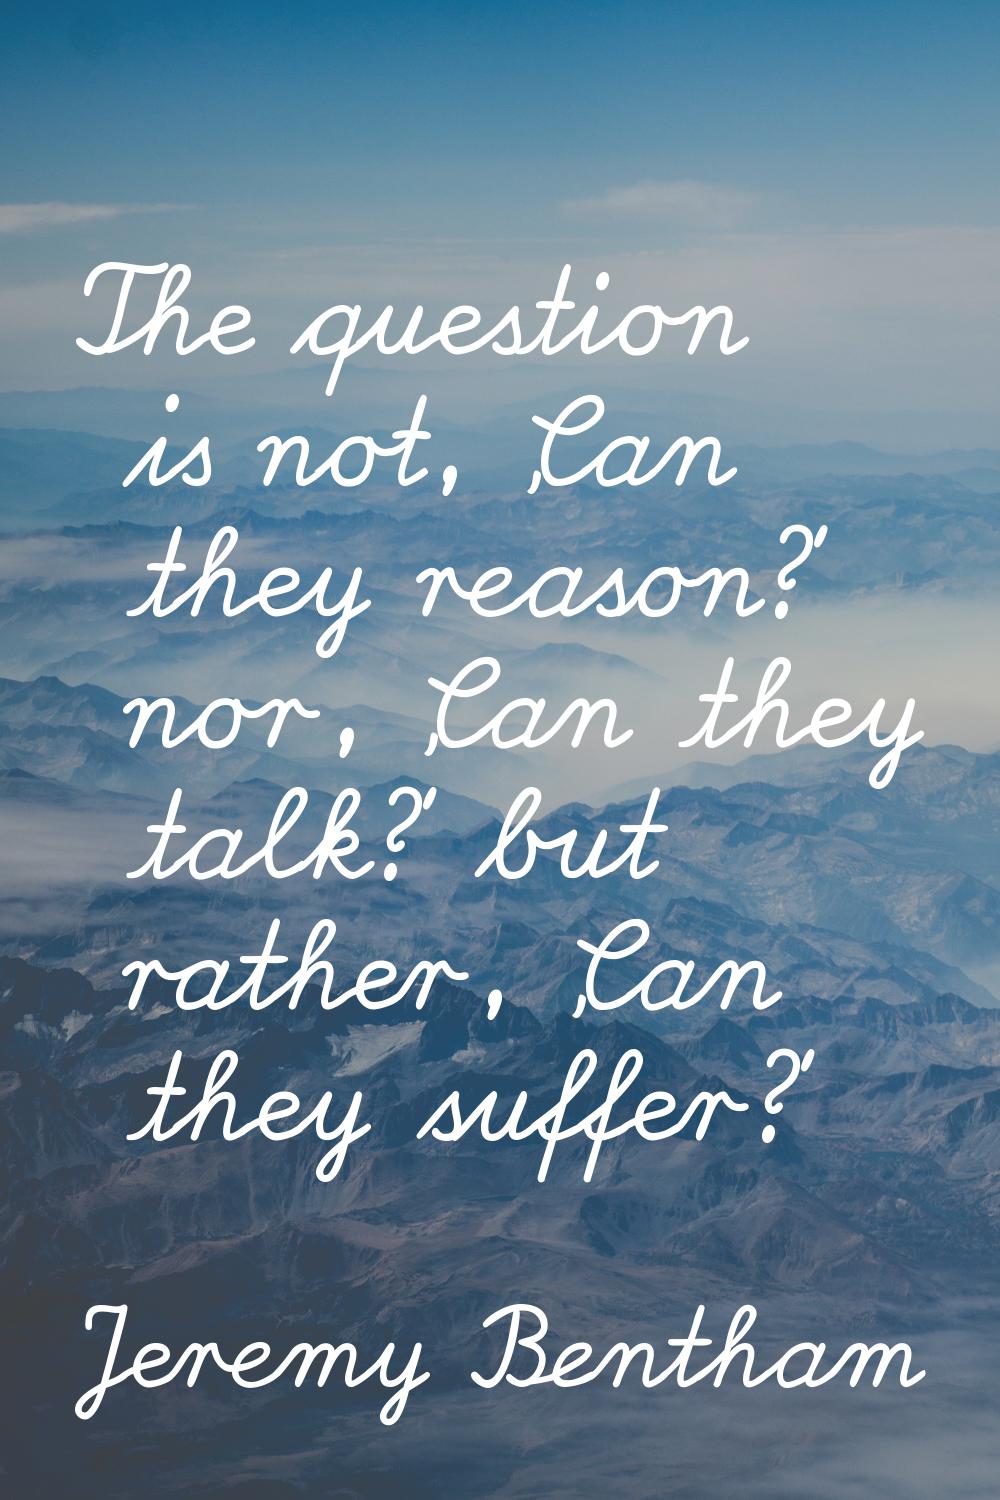 The question is not, 'Can they reason?' nor, 'Can they talk?' but rather, 'Can they suffer?'